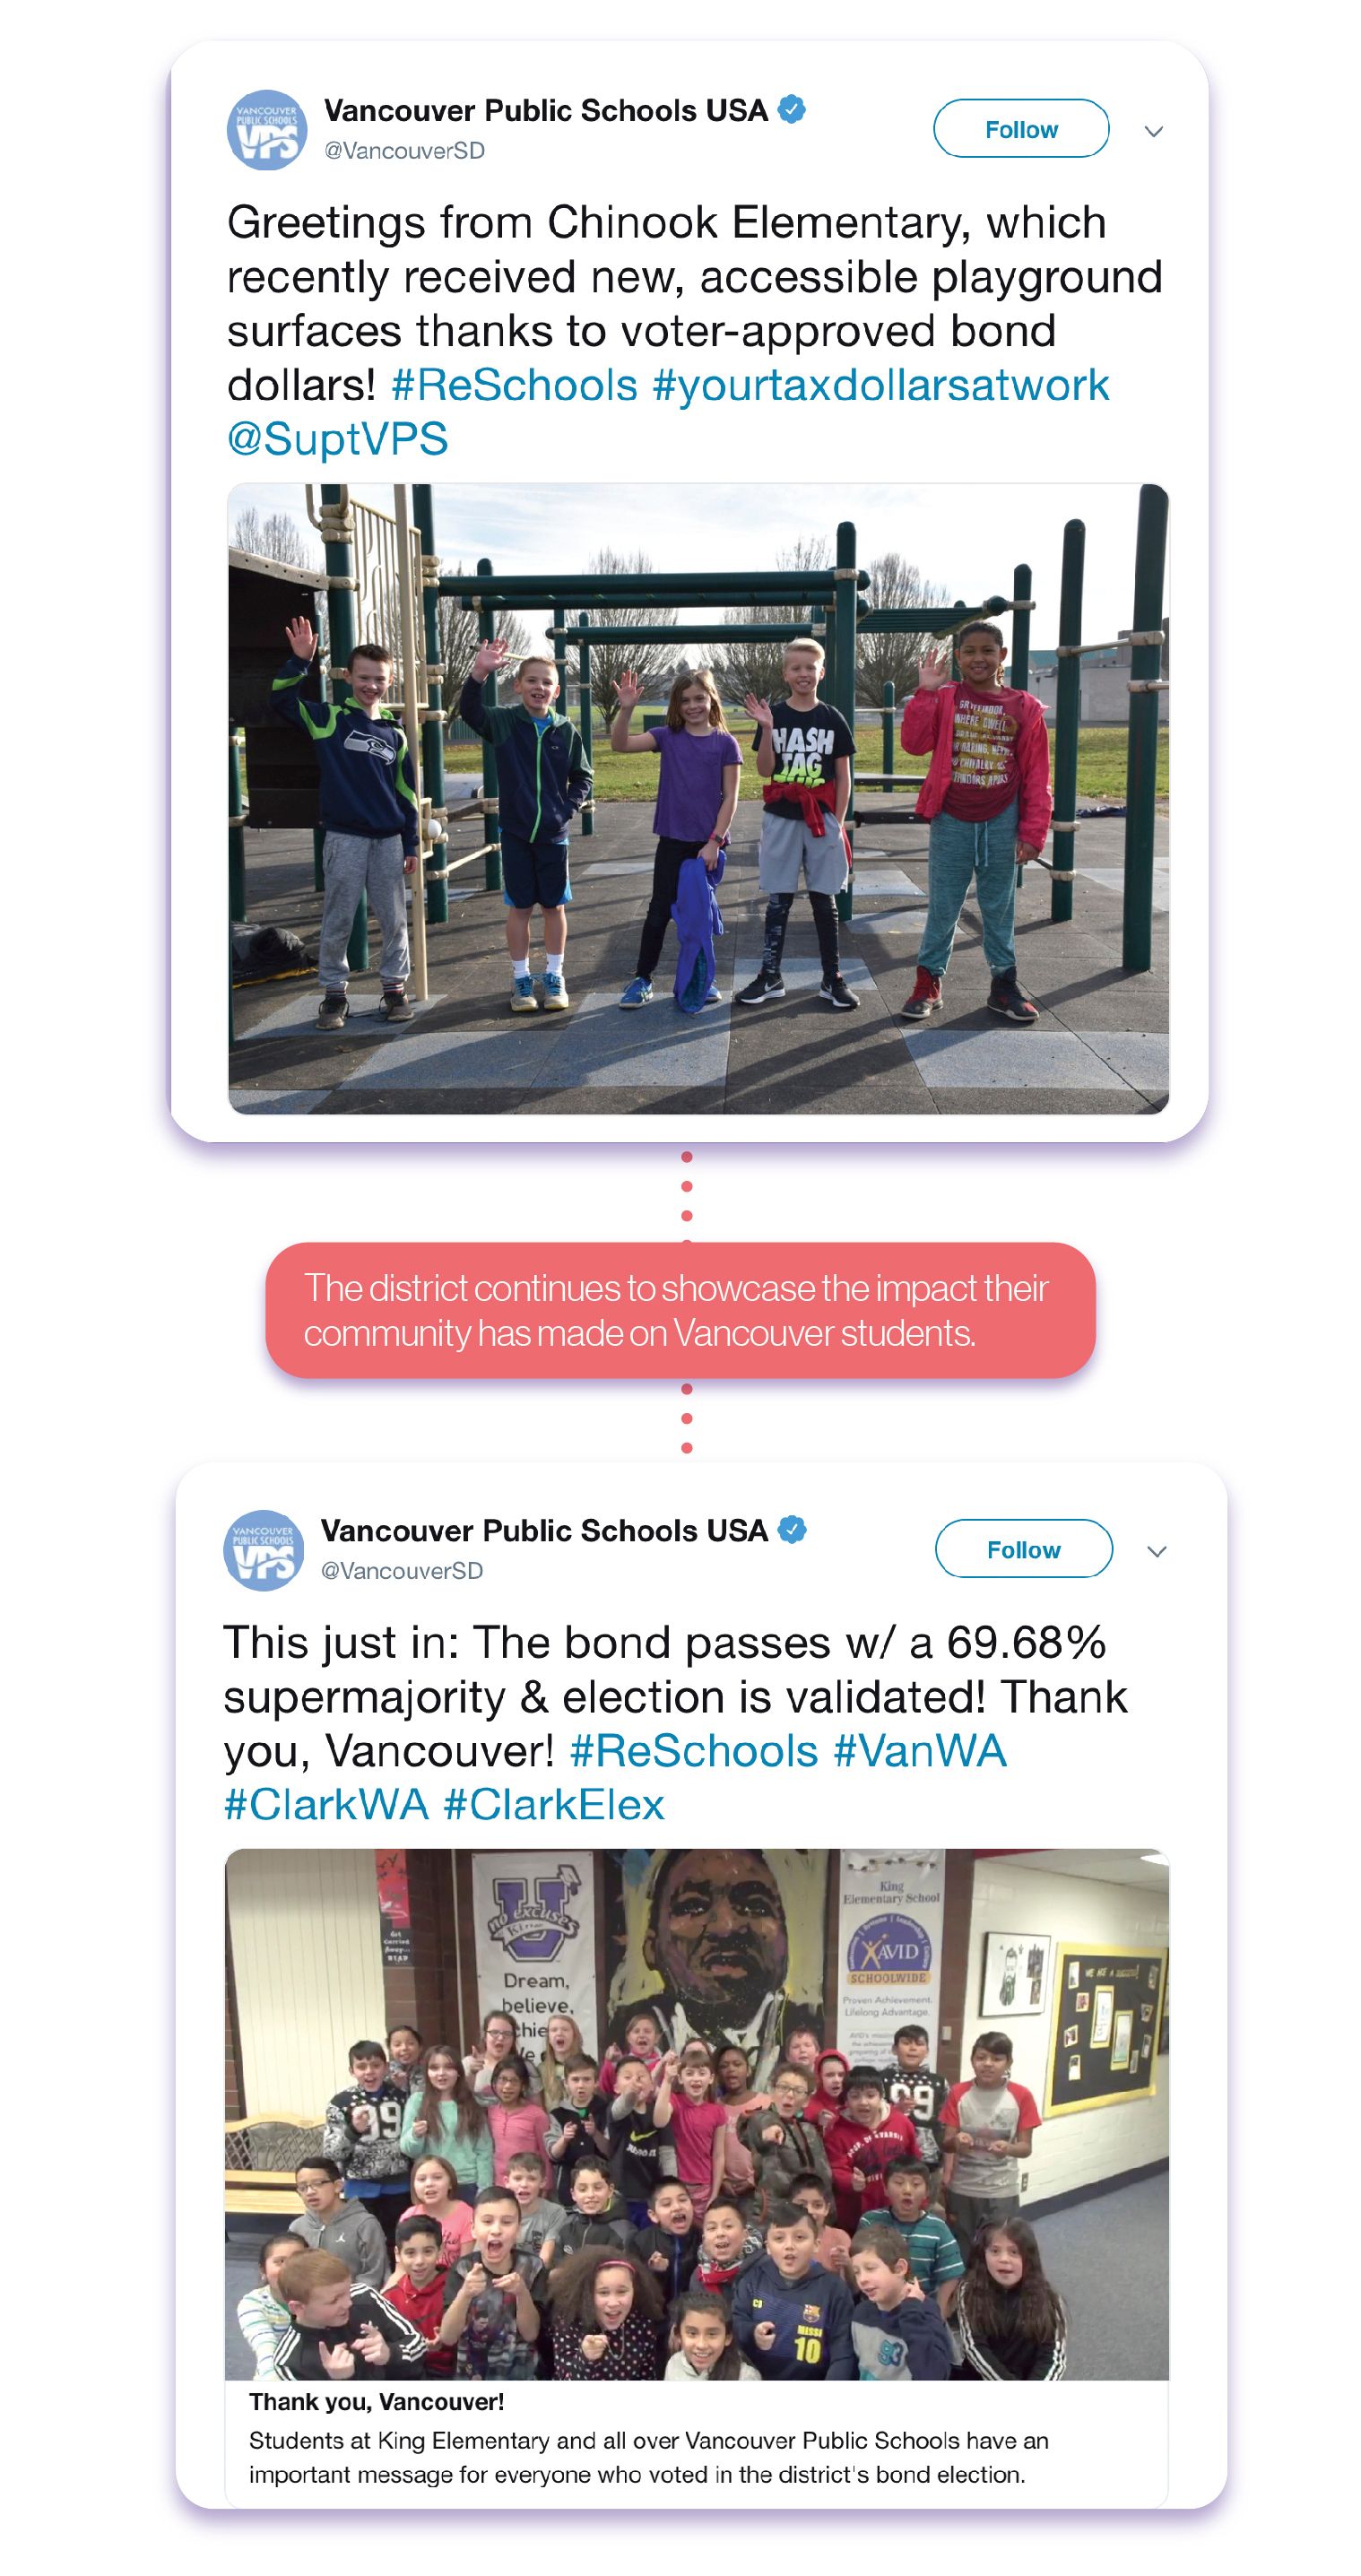 After the vote, VPS keeps voters informed by sharing photos of students celebrating the Yes vote as well as enjoying the new playground funded by the bond.